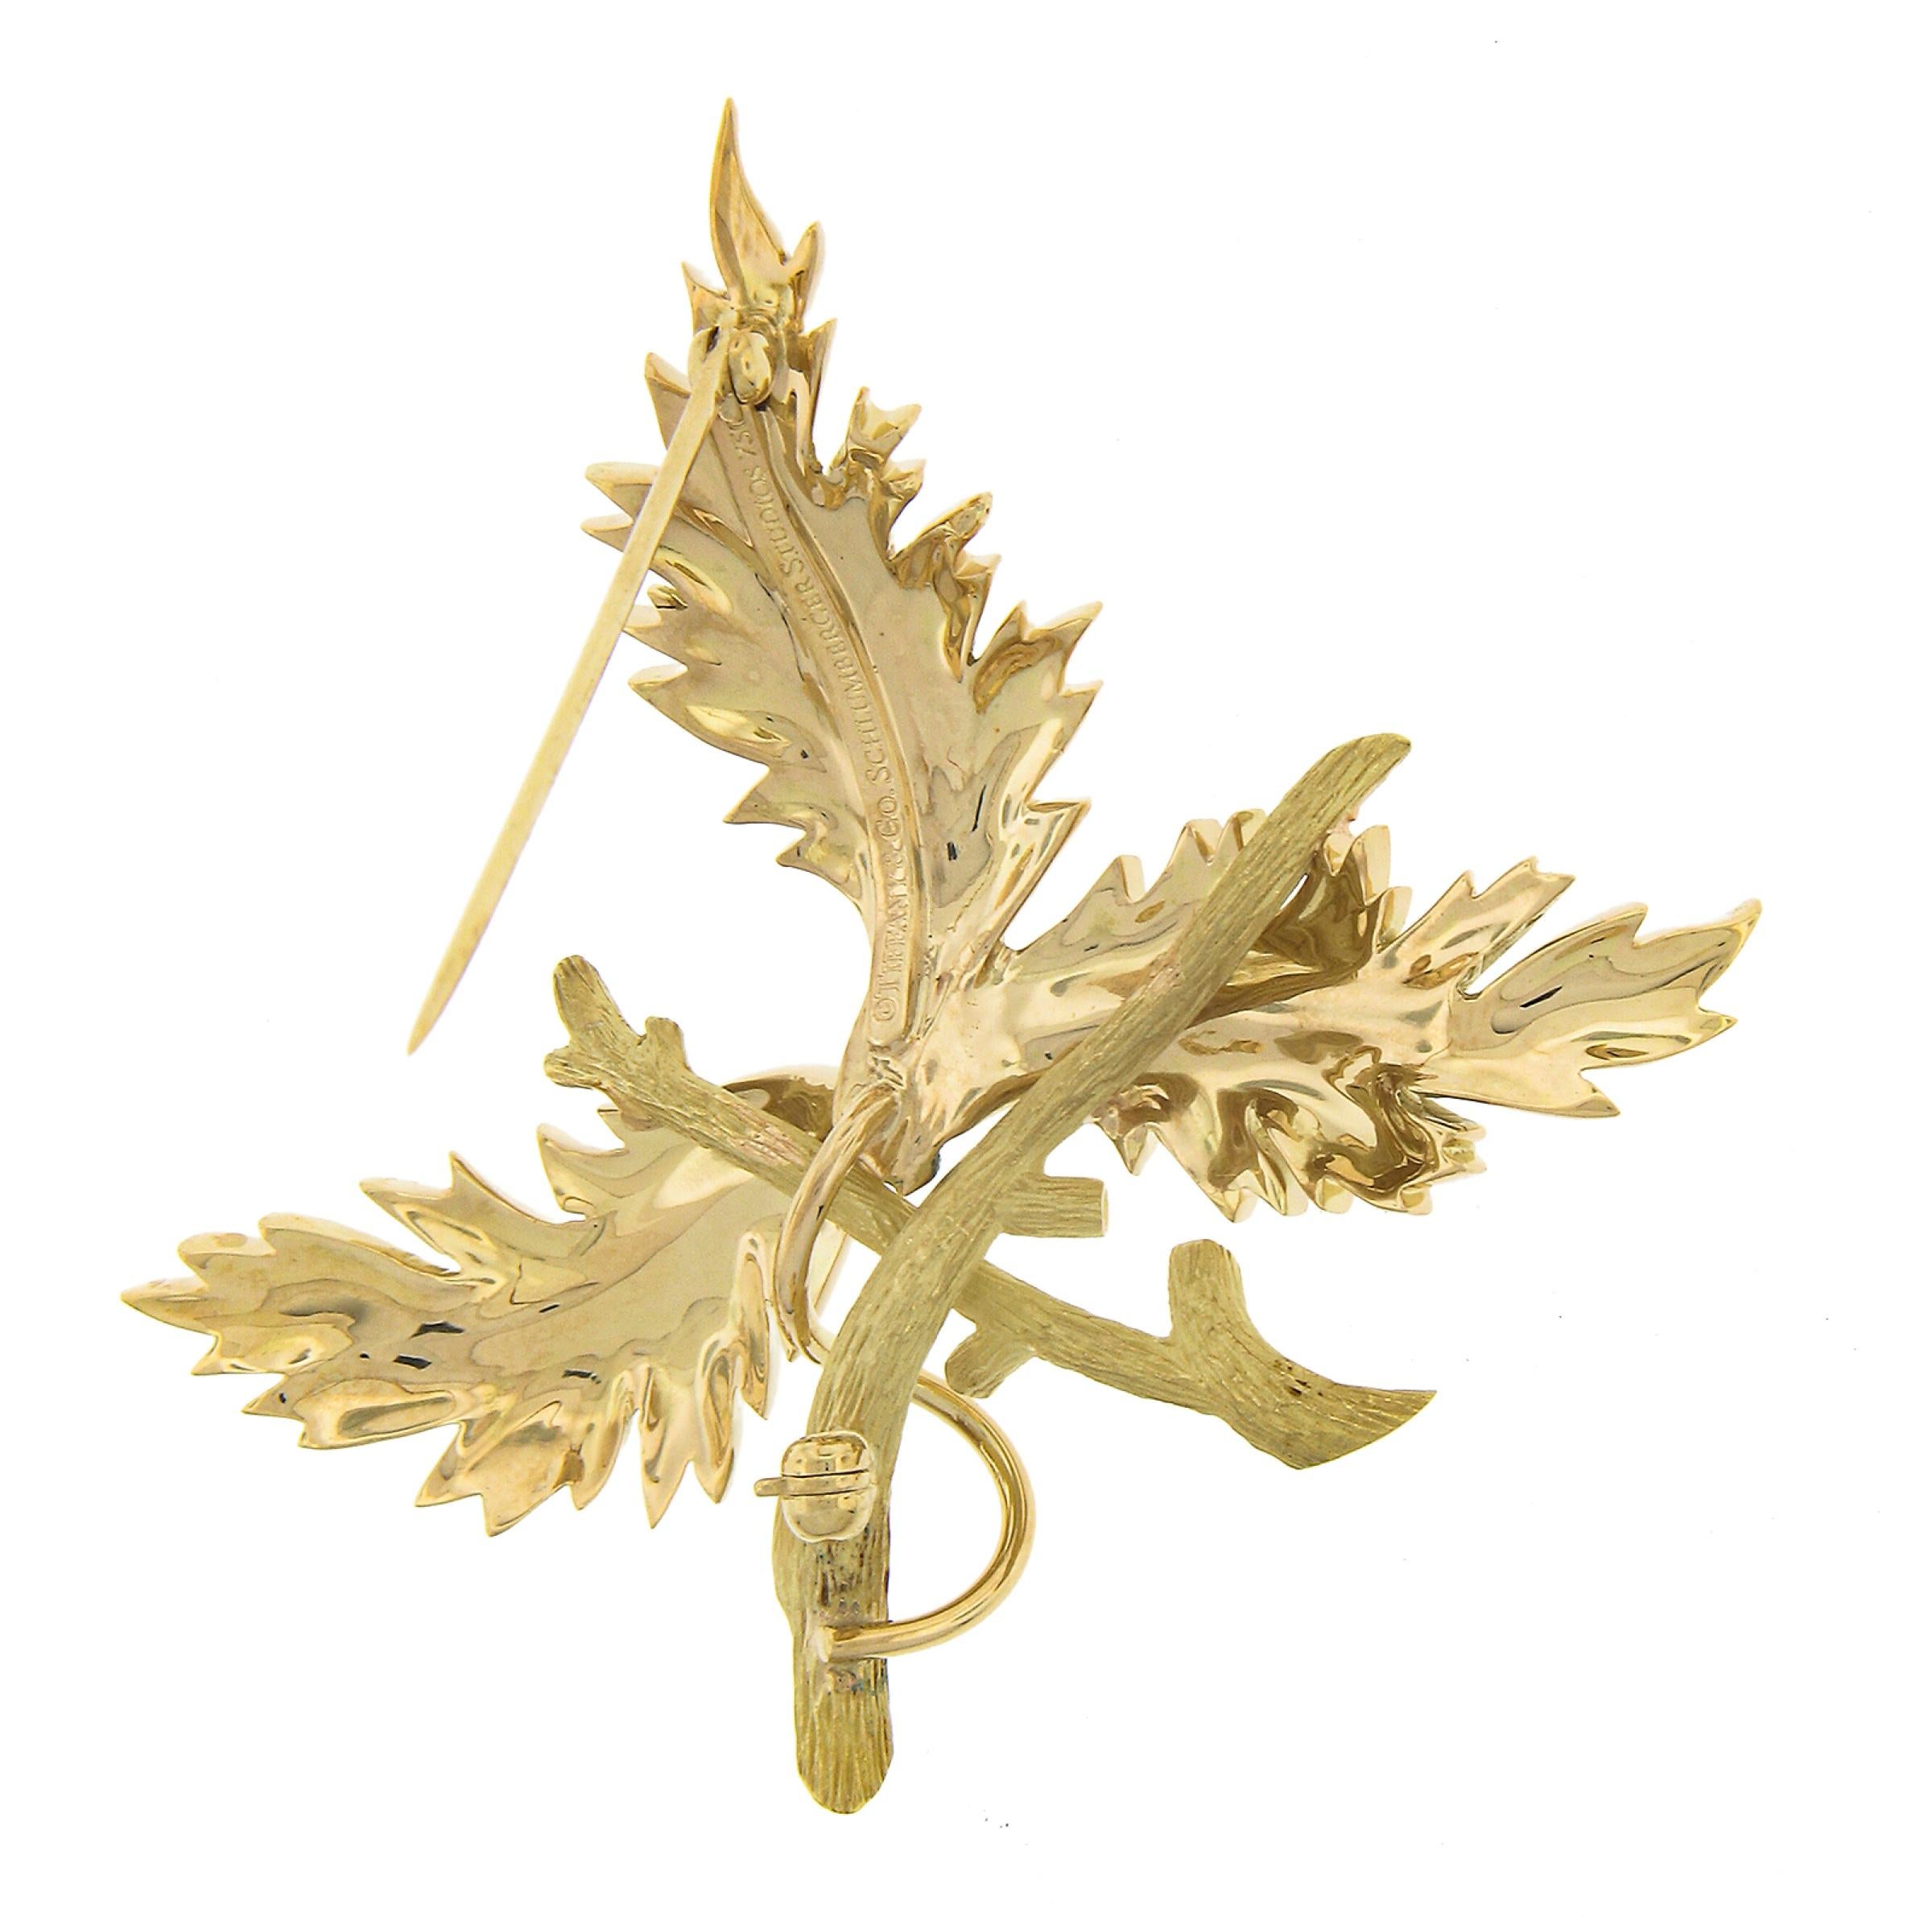 Tiffany & Co. Schlumberger 18k Yellow Gold Textured & Polished 3 Leaf Brooch Pin 1